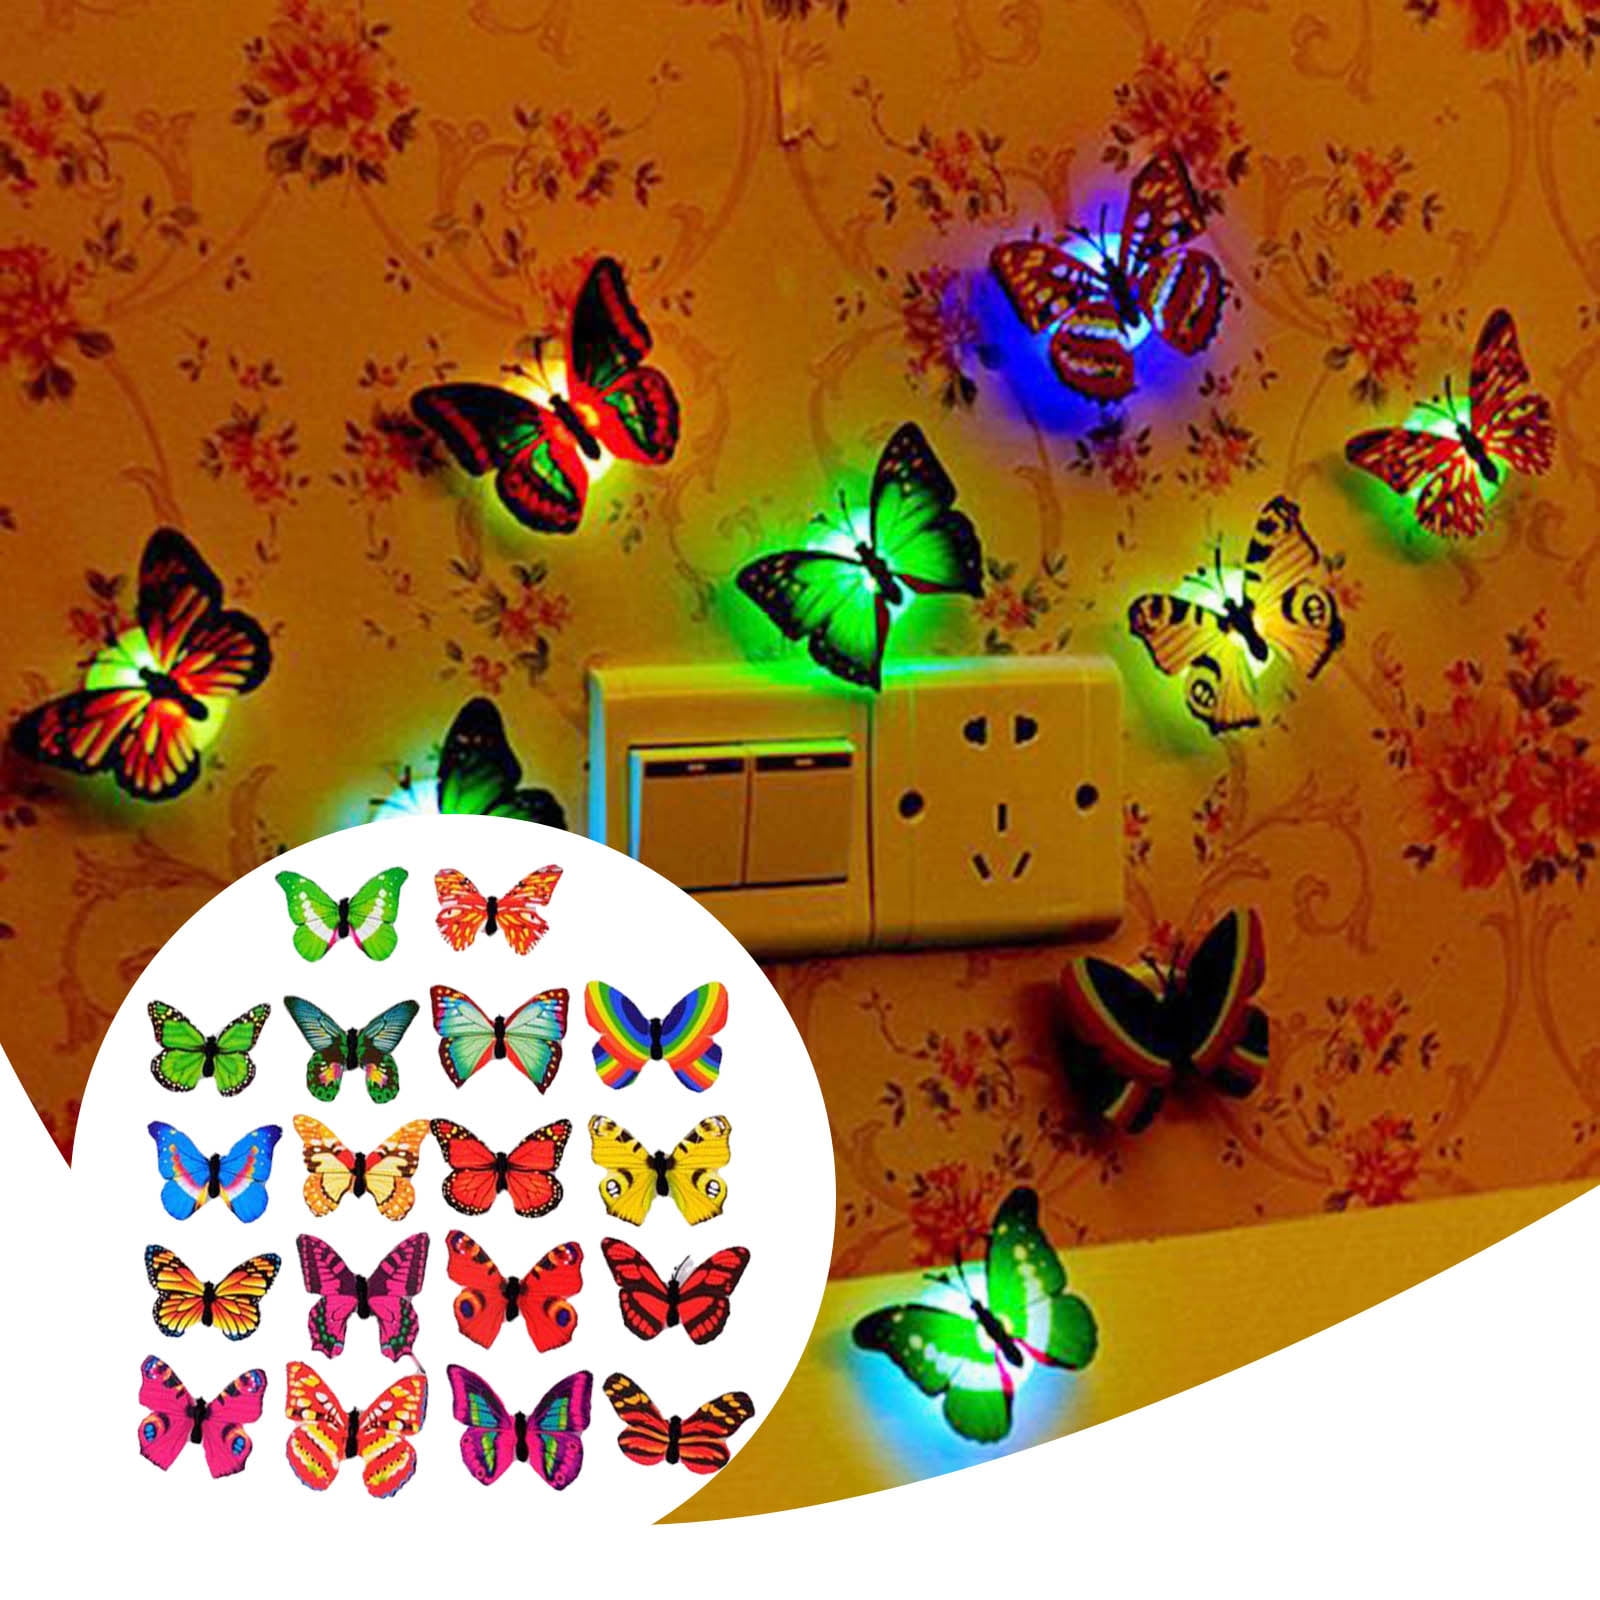 96 Pieces Glow in The Dark Luminous 3D Butterfly Wall Decals Decor  Removable Butterfly Stickers DIY Art Crafts Decor for Kids Bedroom Home  Garden Decorations Christmas (Pink, Purple, Mixed) 